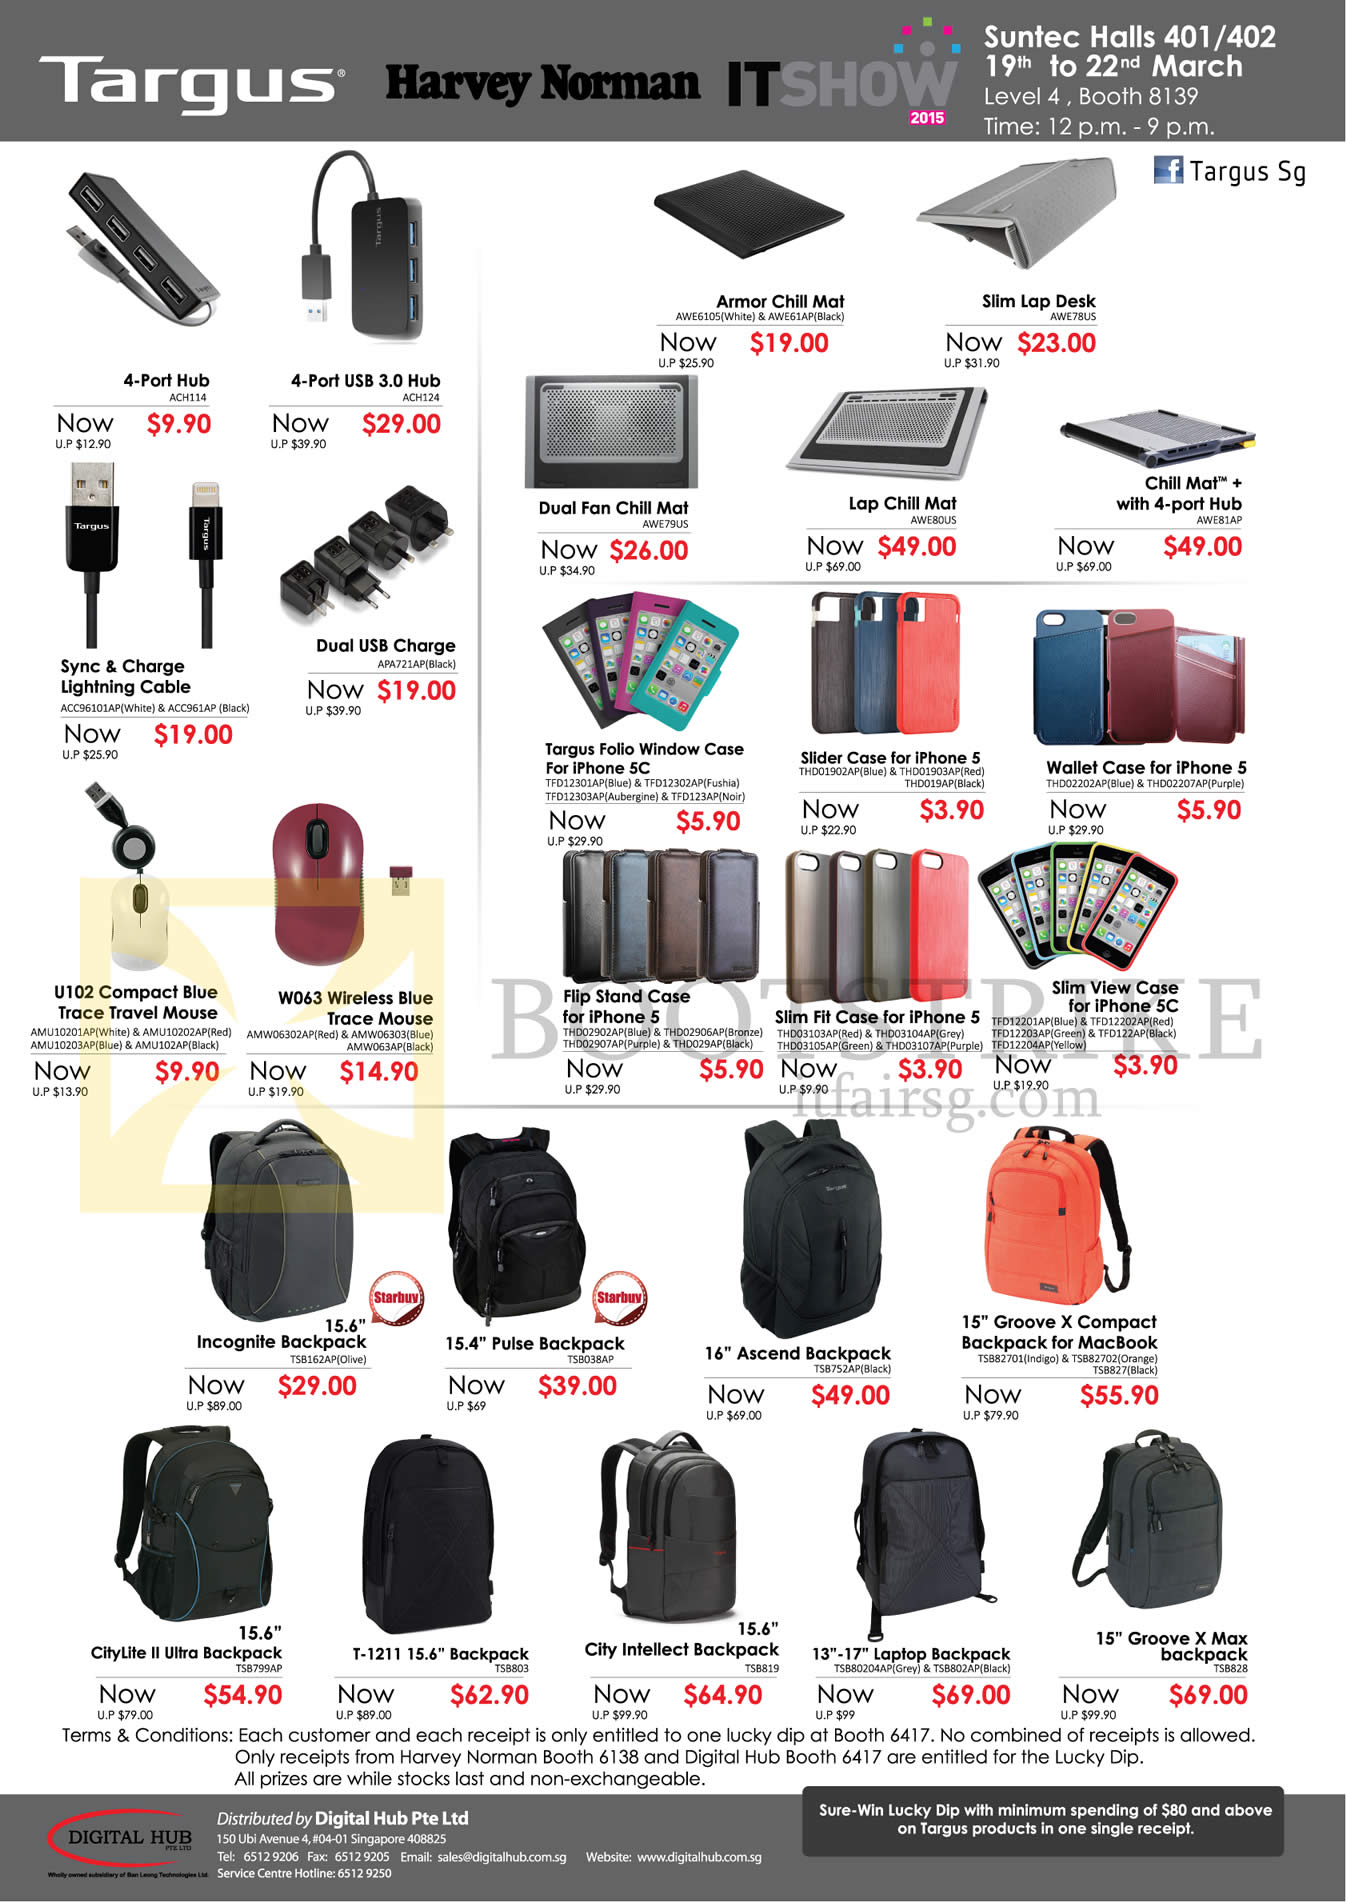 IT SHOW 2015 price list image brochure of Targus USB Hubs, Lightning Cables, Mouse, Cooling Pad, IPhone Case, Backpacks